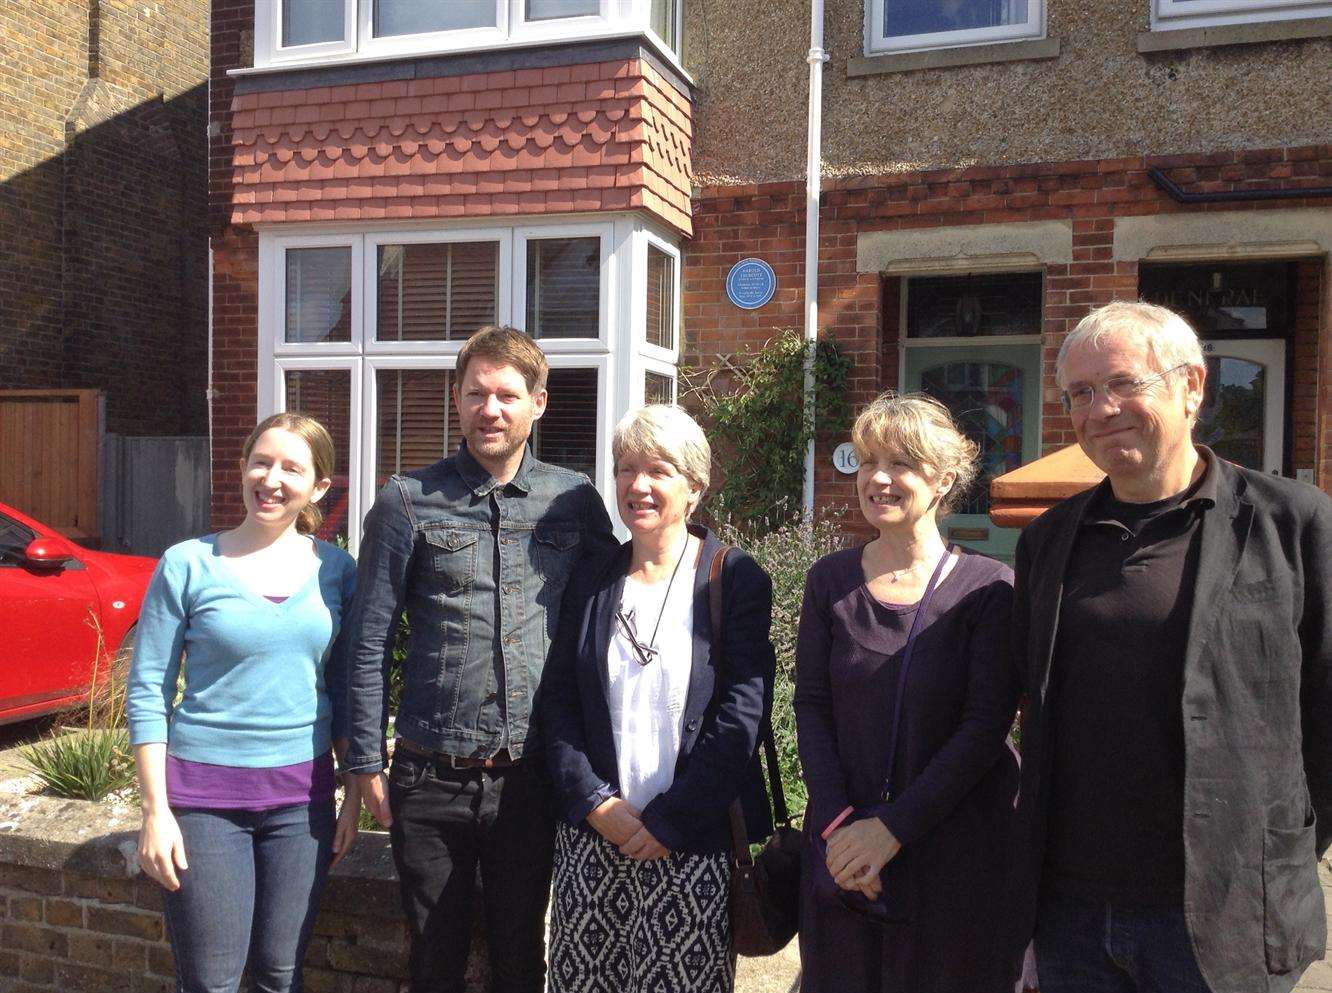 Plaque remembers Harold Truscott: Cop[pser's two daughters Hilary and Veronica and family outside their former home in Claremont Road, Deal